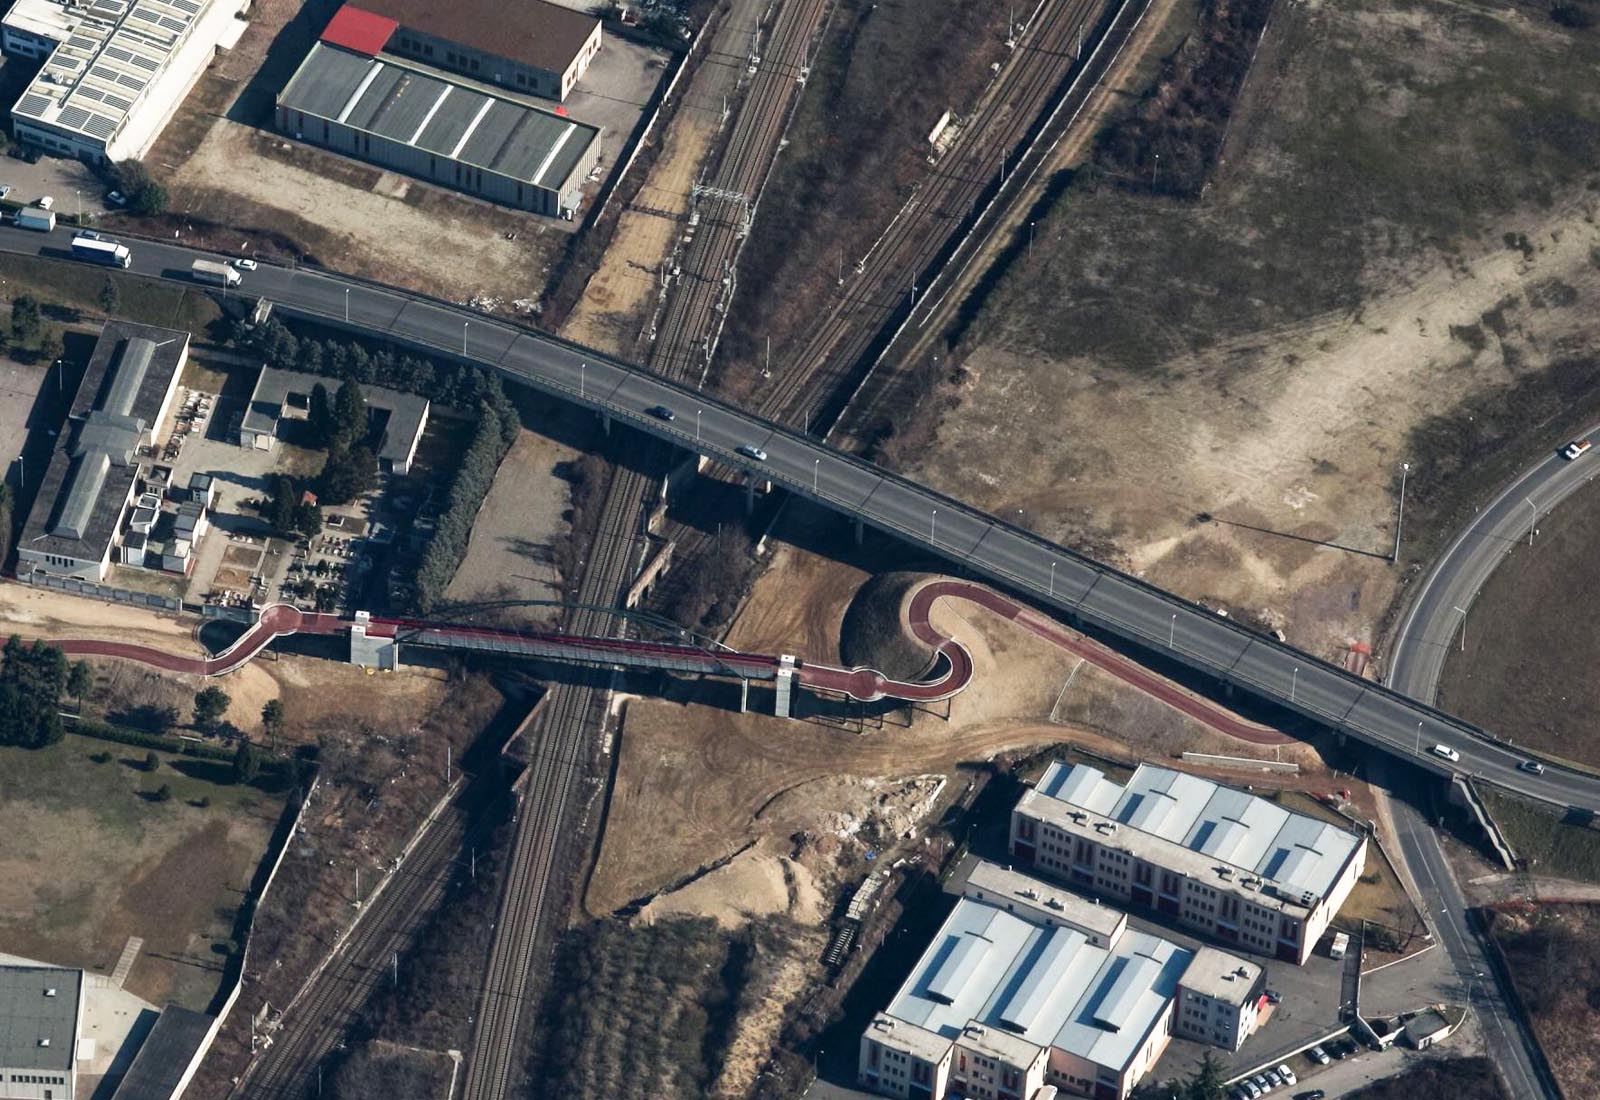 Railroad overpass renovation in Rho - Aerial view